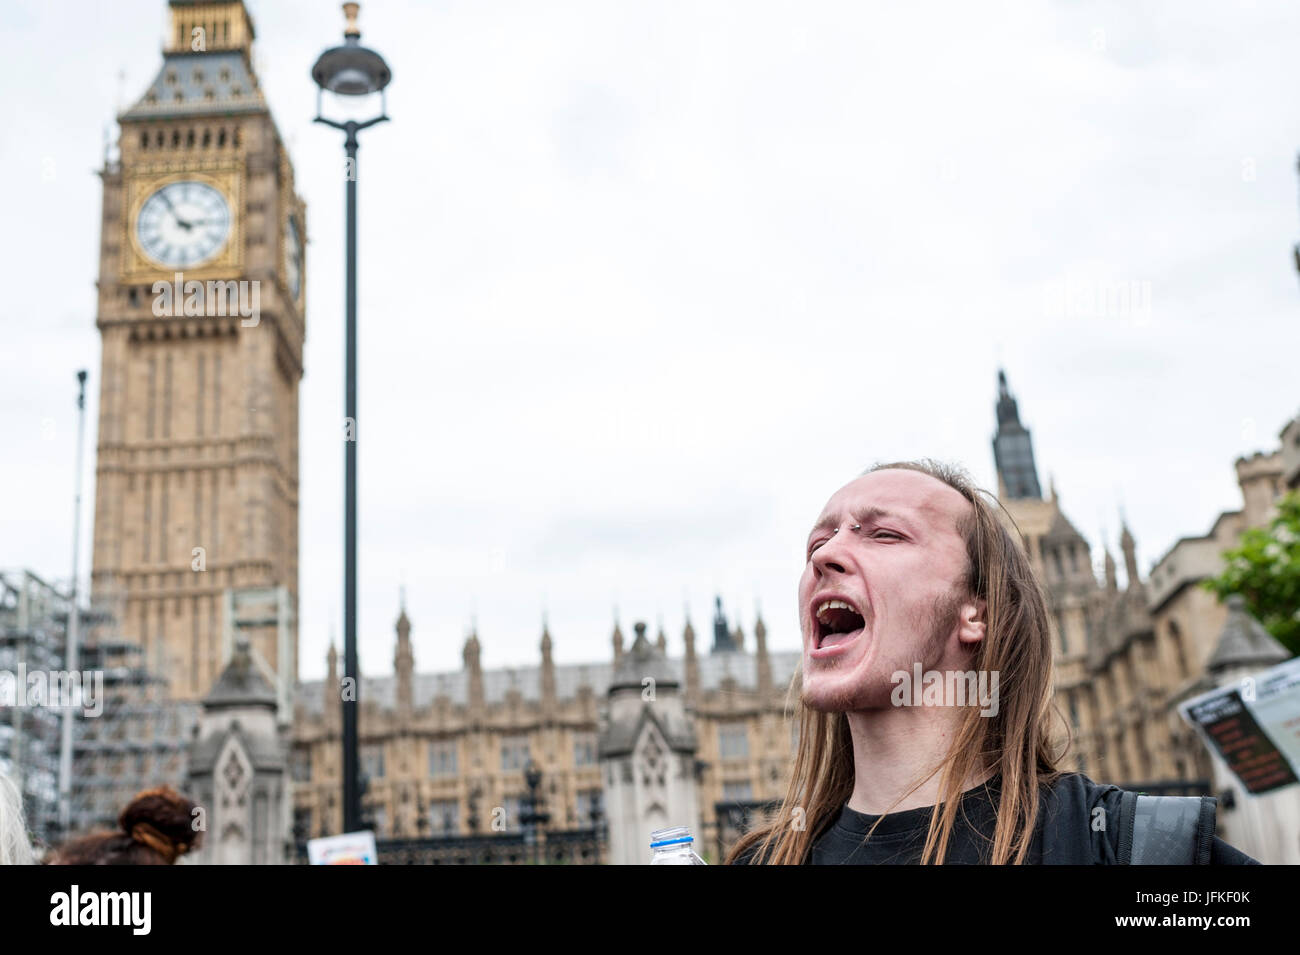 London, UK. 01st July, 2017. LONDON, ENGLAND - JULY 01 Demonstrators for Grenfell Tower joined the 'Not One Day More' rally in Parliement square. Thousands of protesters joined the anti-Tory demonstration at BBC Broadcasting House and marched to Parliament Square. The demonstrators were calling for an end to the Conservative Government and policies of austerity Credit: onebluelight.com/Alamy Live News Credit: onebluelight.com/Alamy Live News Stock Photo